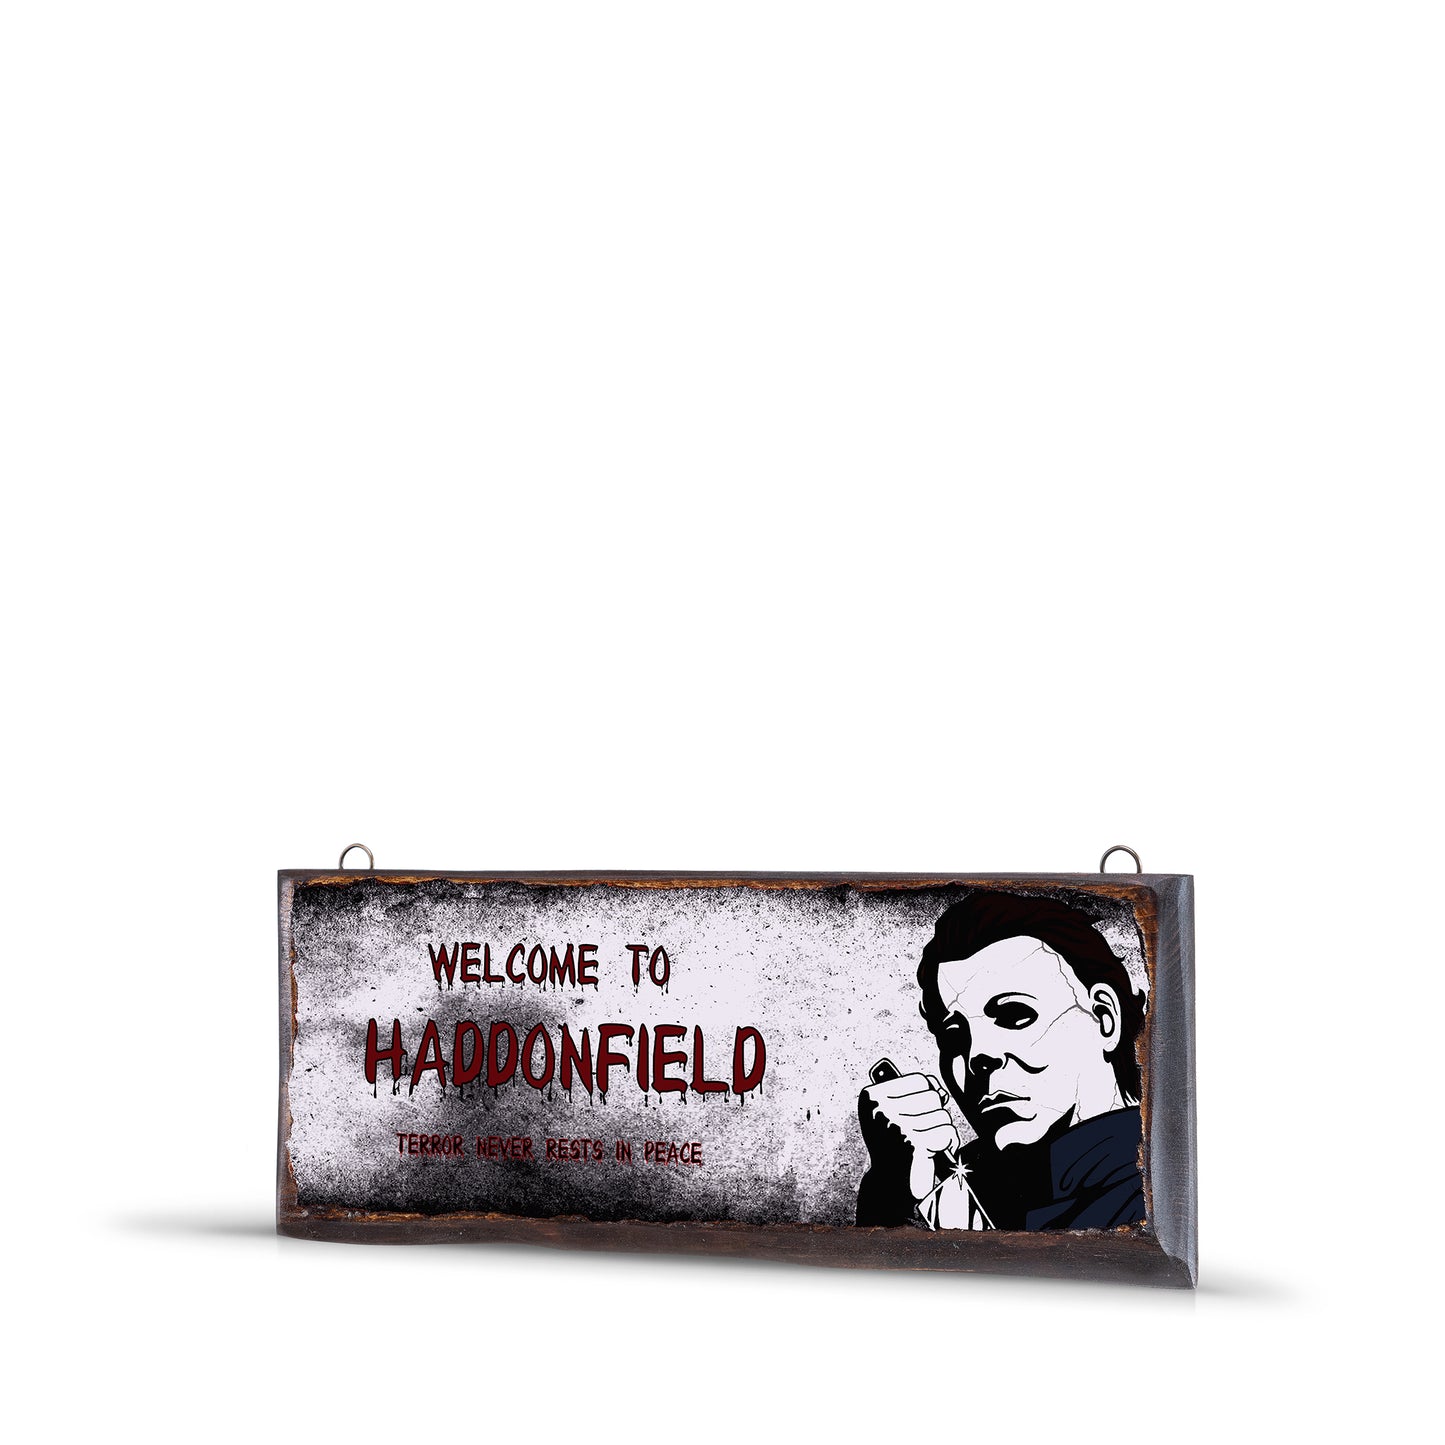 WELCOME TO HADDONFIELD - WSS022